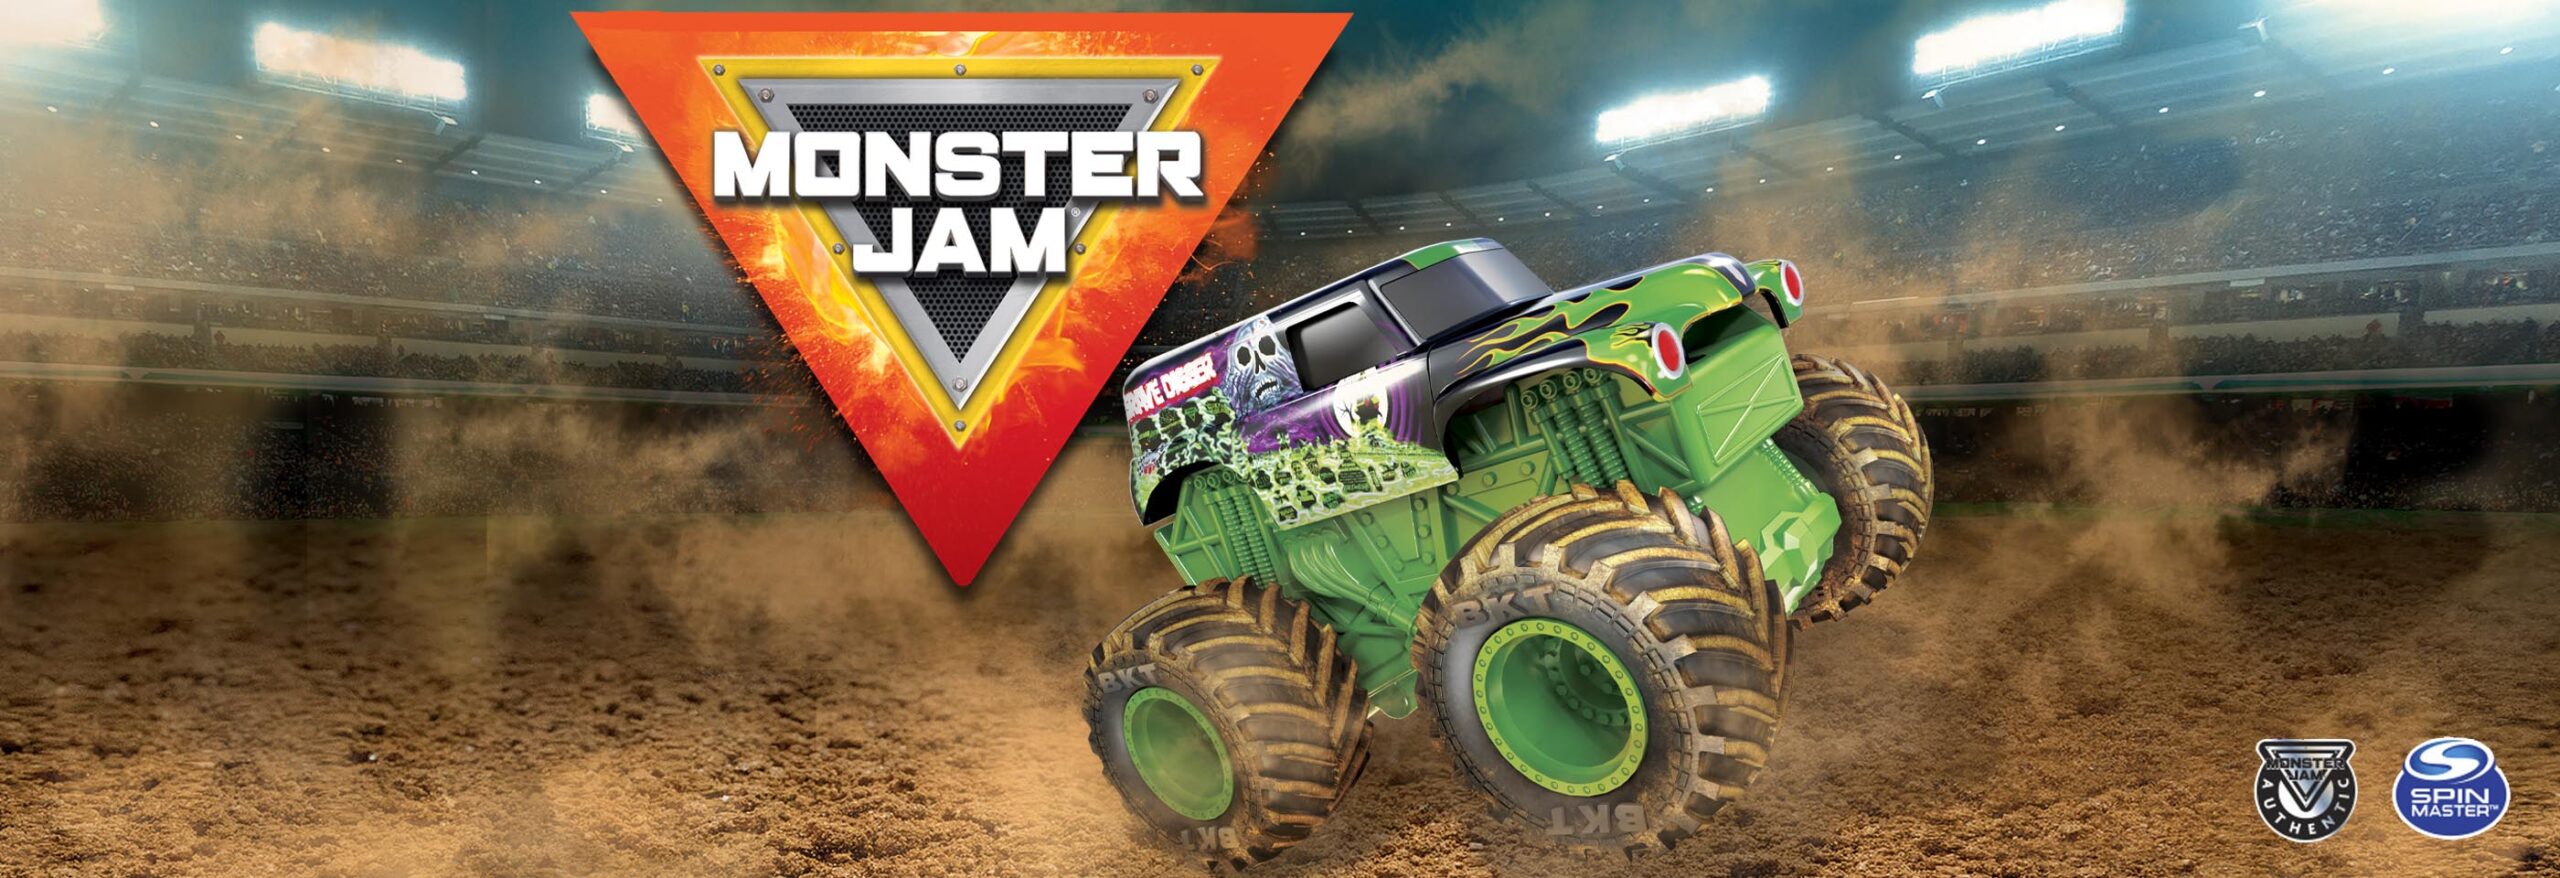 Be in to WIN with Monster Jam!